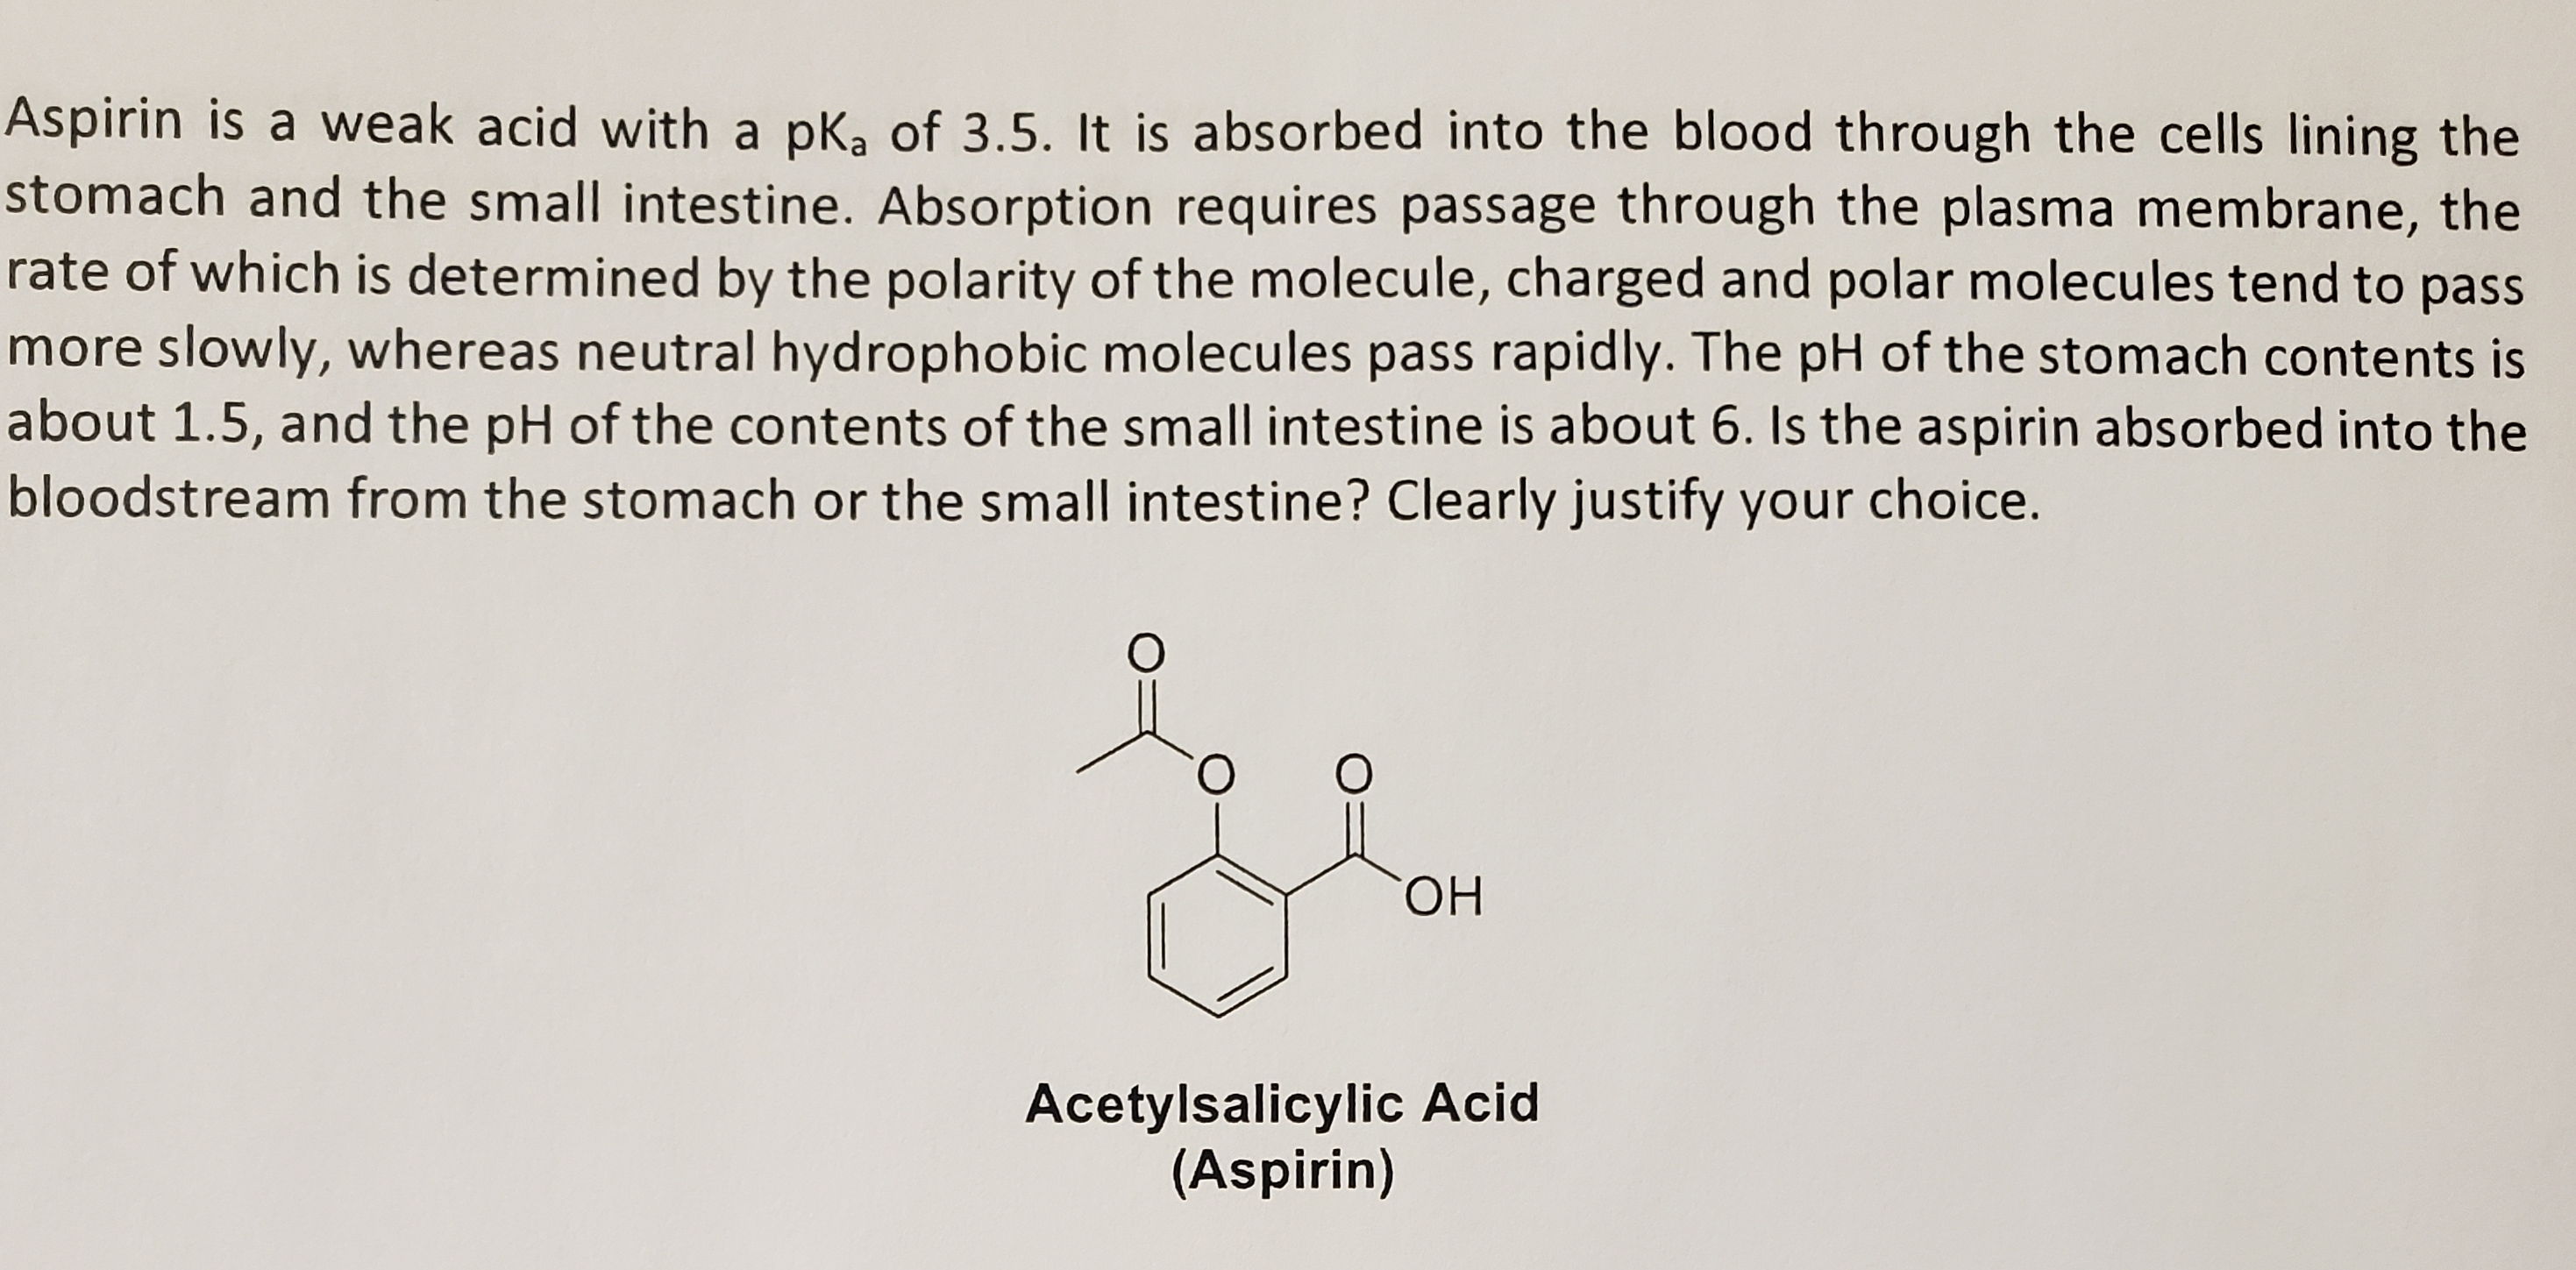 Aspirin is a weak acid with a pk, of 3.5. It is absorbed into the blood through the cells lining the
stomach and the small intestine. Absorption requires passage through the plasma membrane, the
rate of which is determined by the polarity of the molecule, charged and polar molecules tend to pass
more slowly, whereas neutral hydrophobic molecules pass rapidly. The pH of the stomach contents is
about 1.5, and the pH of the contents of the small intestine is about 6. Is the aspirin absorbed into the
bloodstream from the stomach or the small intestine? Clearly justify your choice.
ОН
Acetylsalicylic Acid
(Aspirin)
